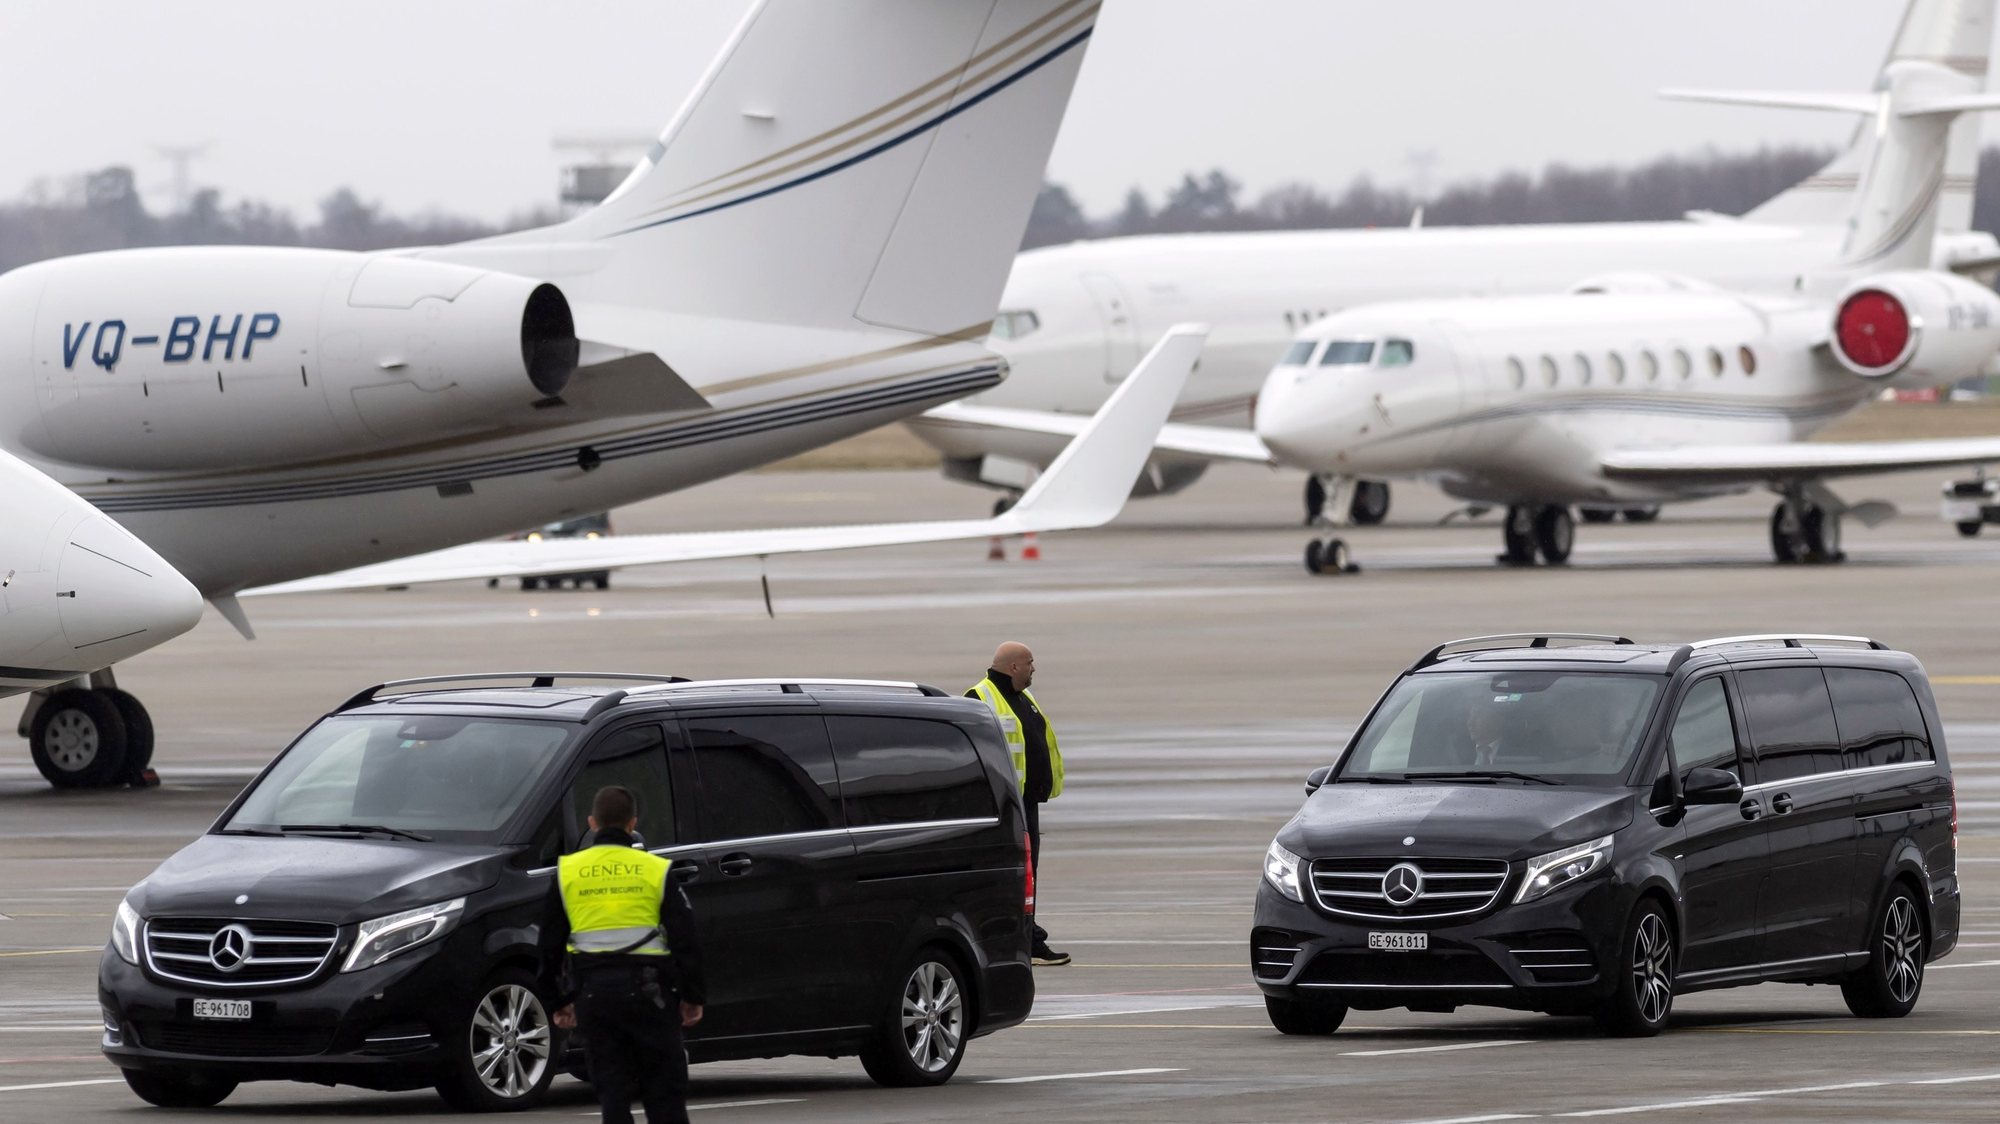 epa07427322 A motorcade rumoured to be carrying Algerian President Abdelaziz Bouteflika drives on the apron to a Gulfstream 4SP jet operated by the Algerian government, at the airport in Geneva, Switzerland, 10 March 2019. The Algerian government plane landed at the Geneva international airport Cointrin and is expected to transport Bouteflika from Geneva where he had been hospitalized at the University Hospitals of Geneva (HUG) since the end of February back to Algeria. Bouteflika is serving as the president since 1999, and announced he will be running for a fifth term in presidential elections scheduled for 18 April 2019.  EPA/MARTIAL TREZZINI